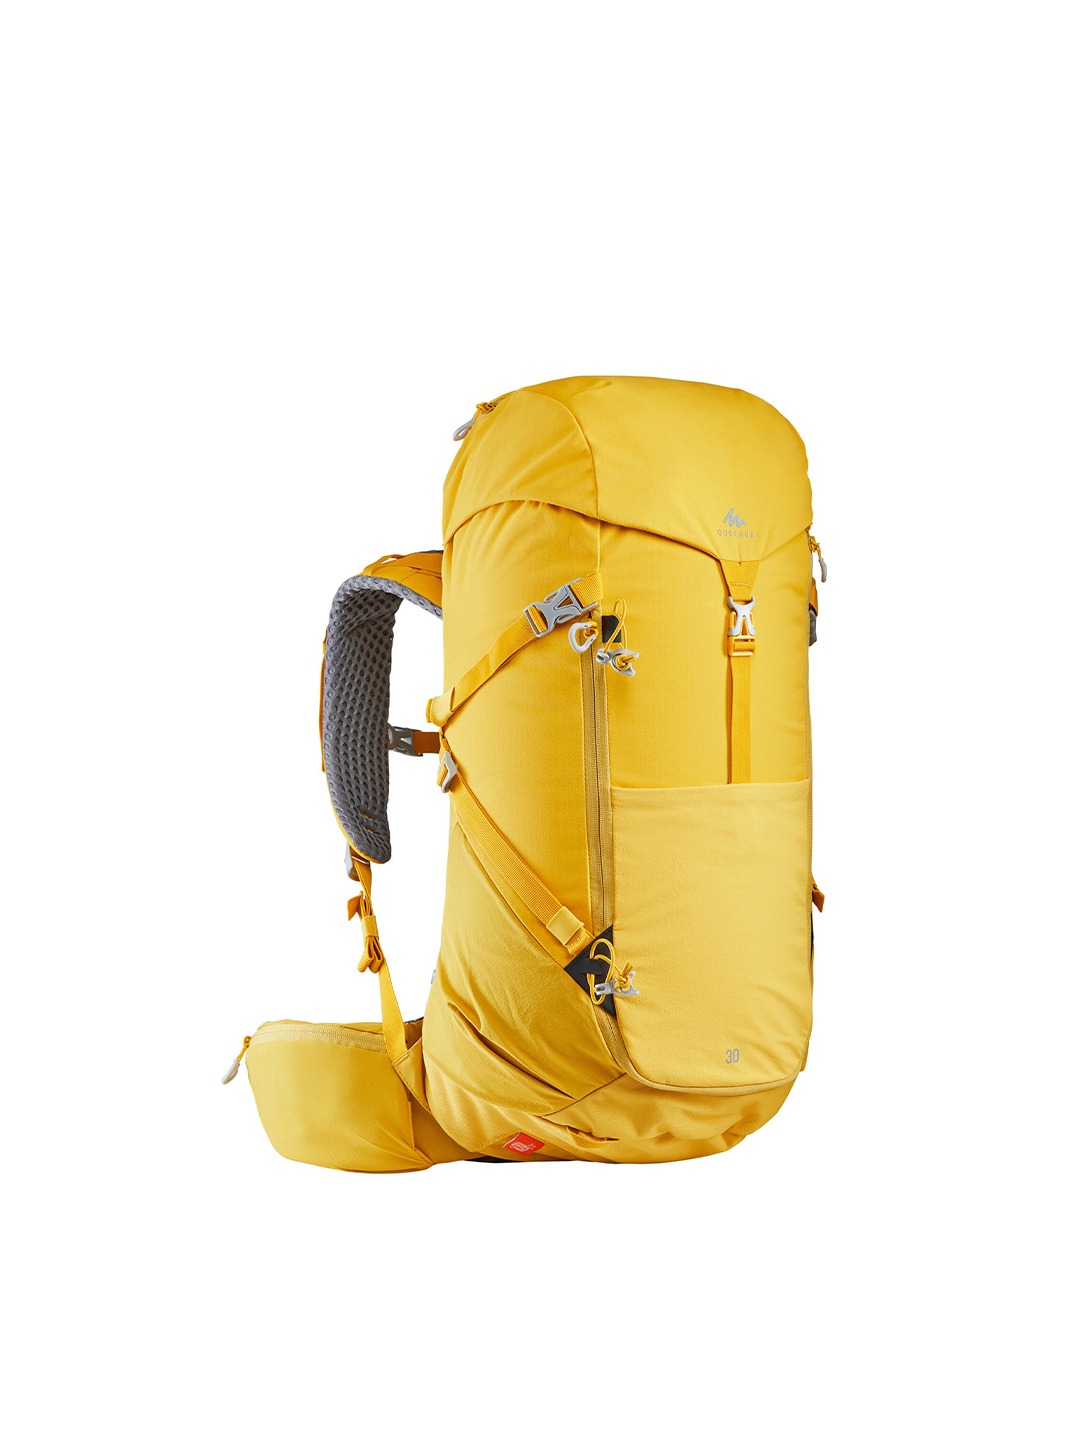 Accessories Backpacks | Quechua By Decathlon Unisex Yellow Backpack - YO22535